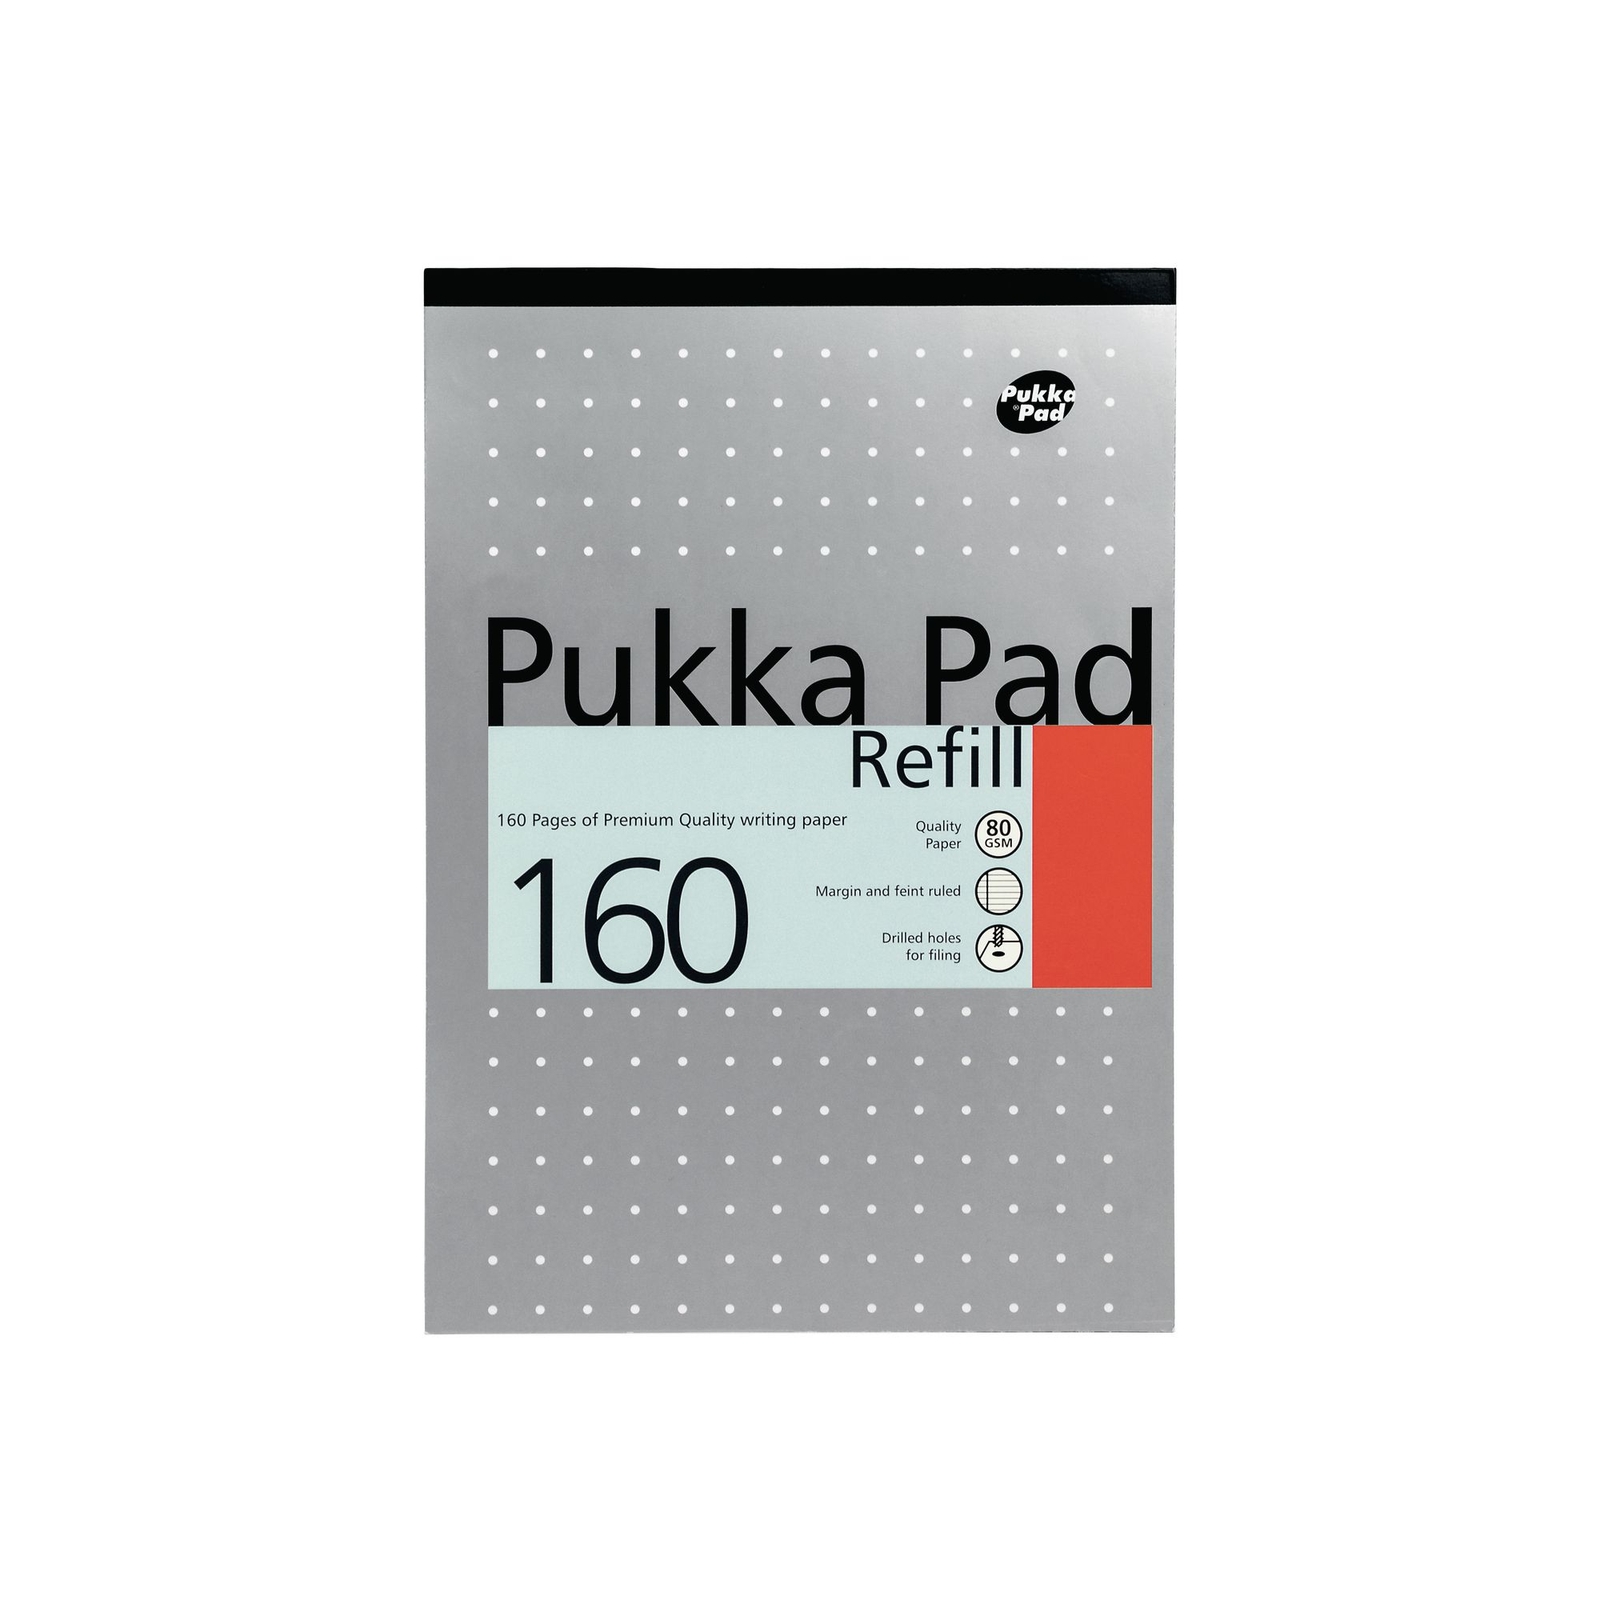 Pukka Pad Metallic Refill Pads - A4 - 160 pages - 8mm Lined, Margin, 4 Hole